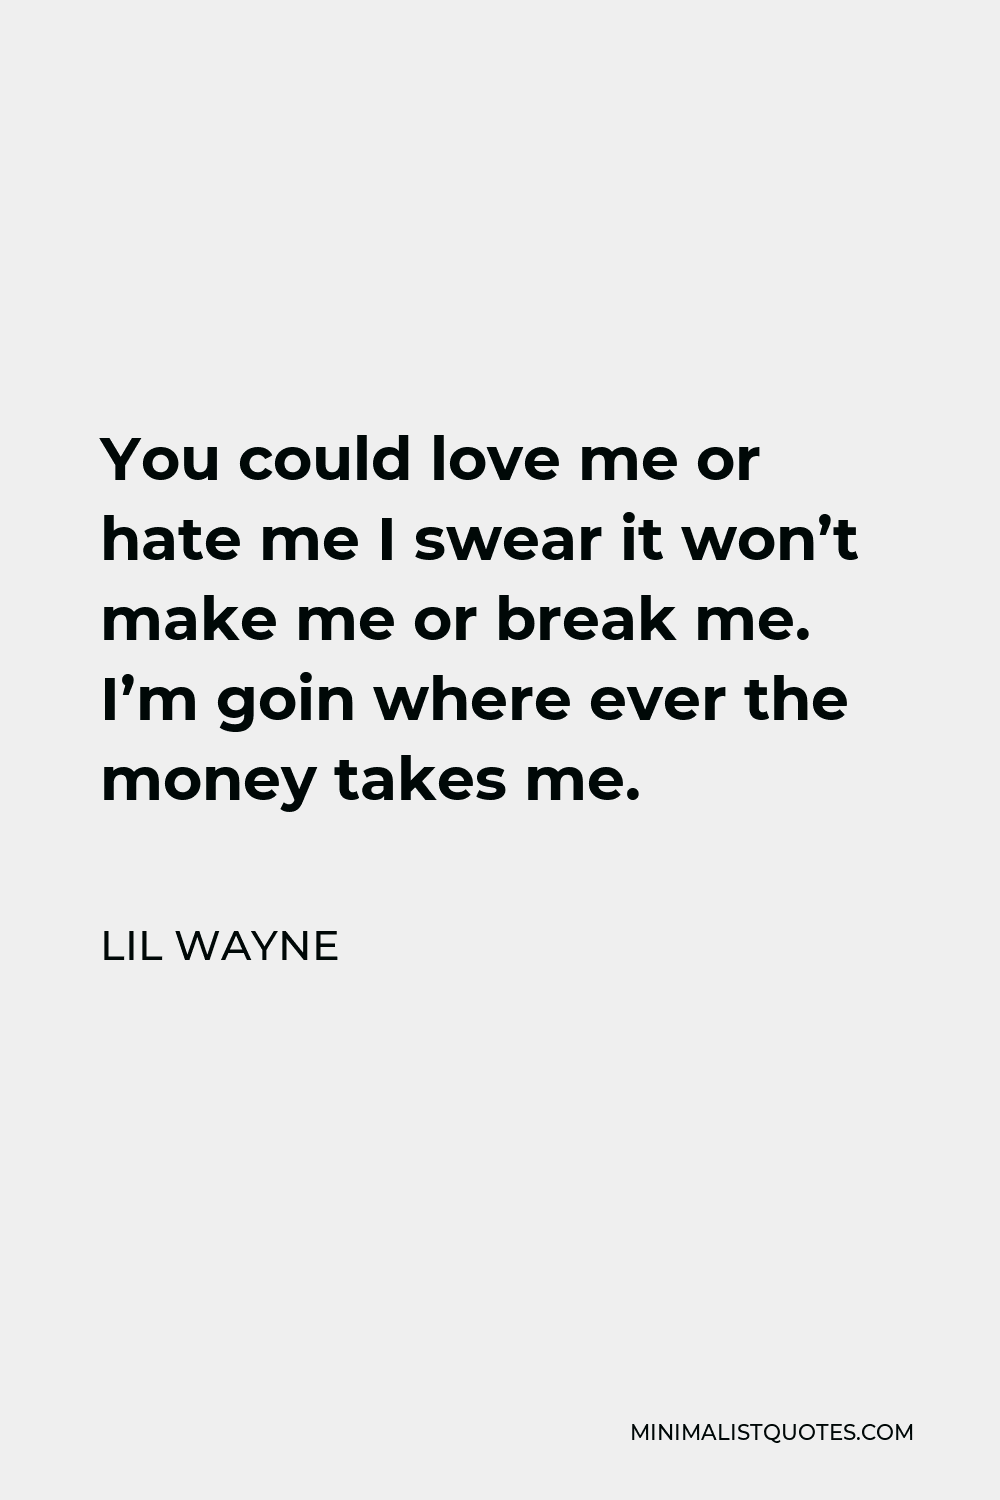 Lil Wayne Quote - You could love me or hate me I swear it won’t make me or break me. I’m goin where ever the money takes me.